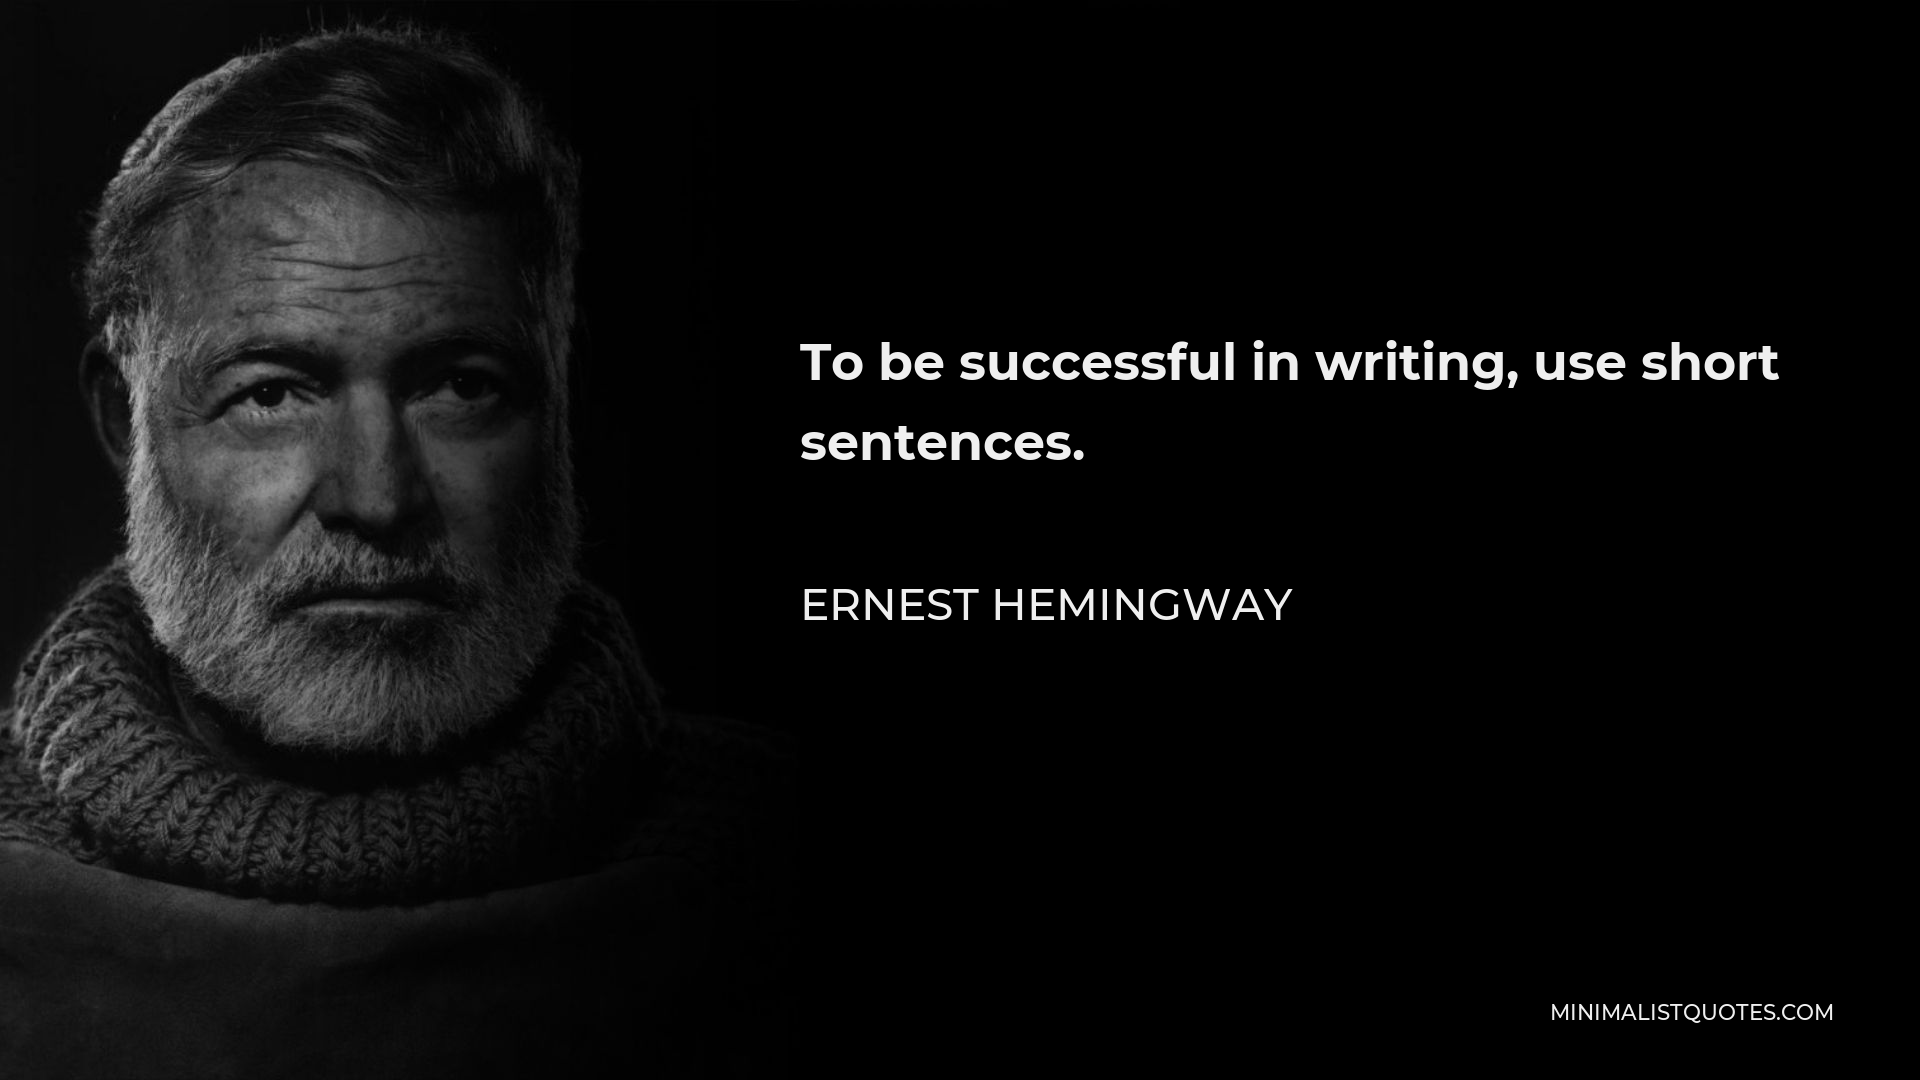 Ernest Hemingway Quote - To be successful in writing, use short sentences.